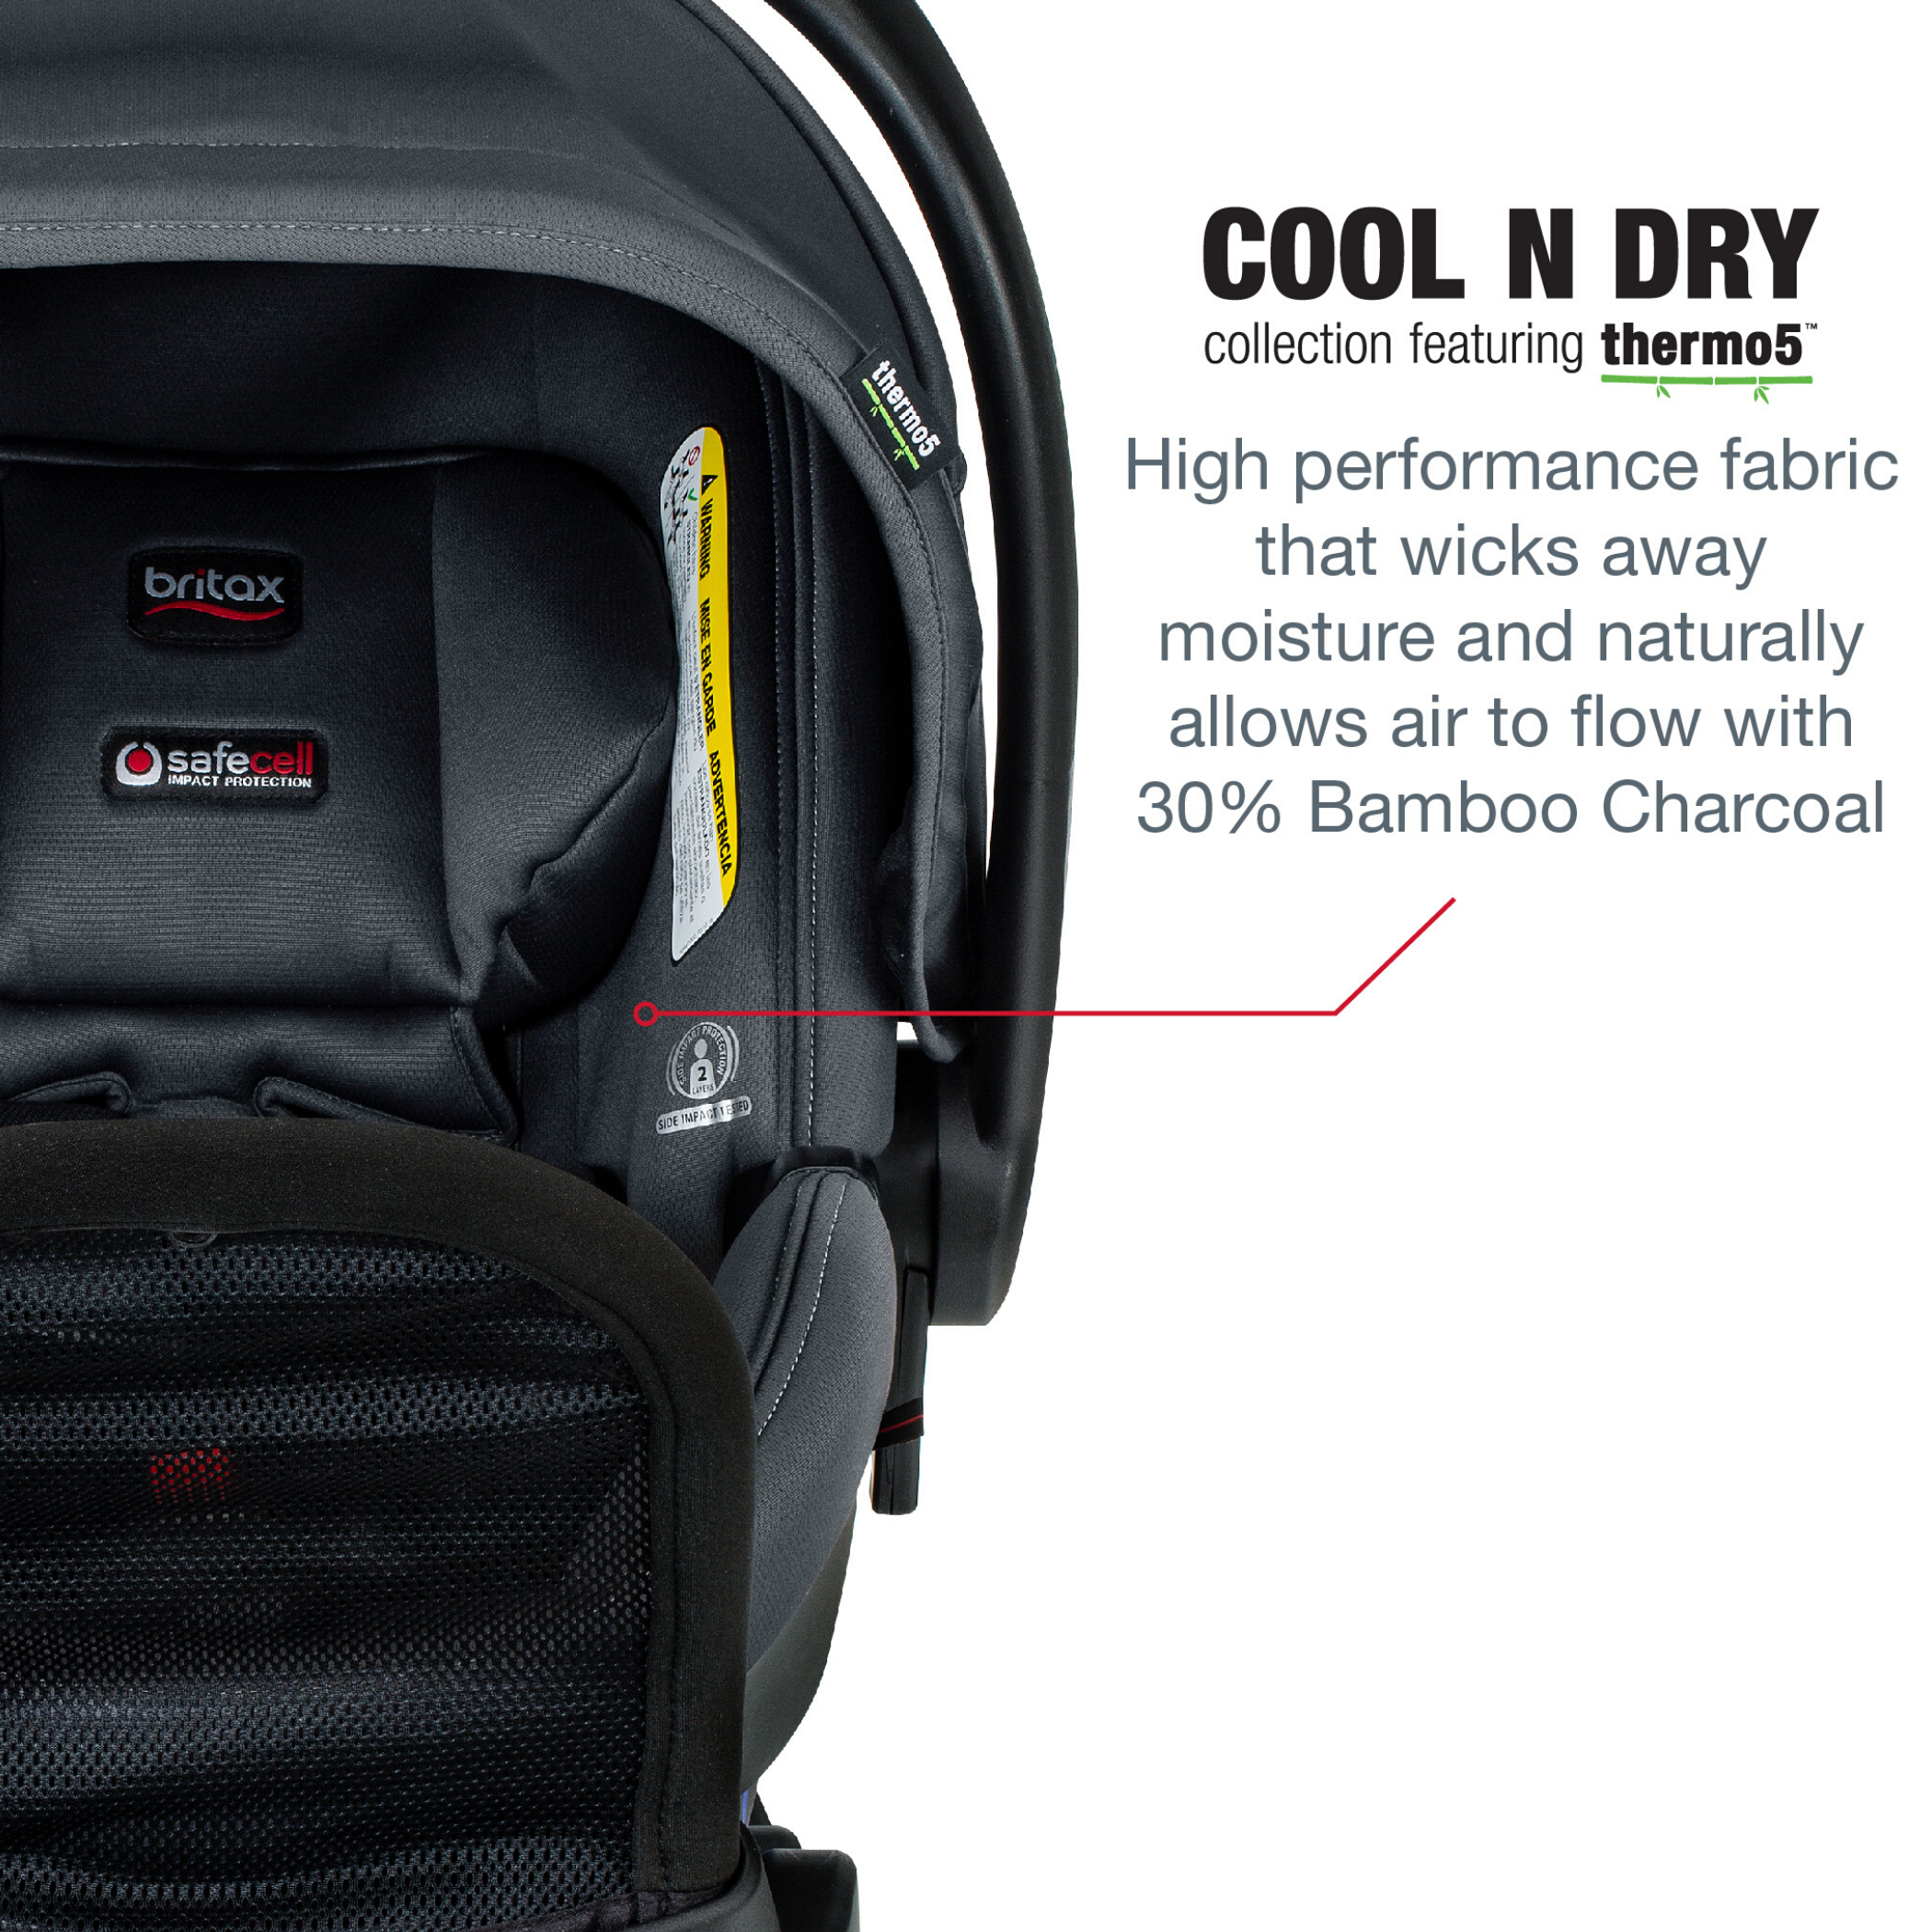 britax endeavours stroller compatibility